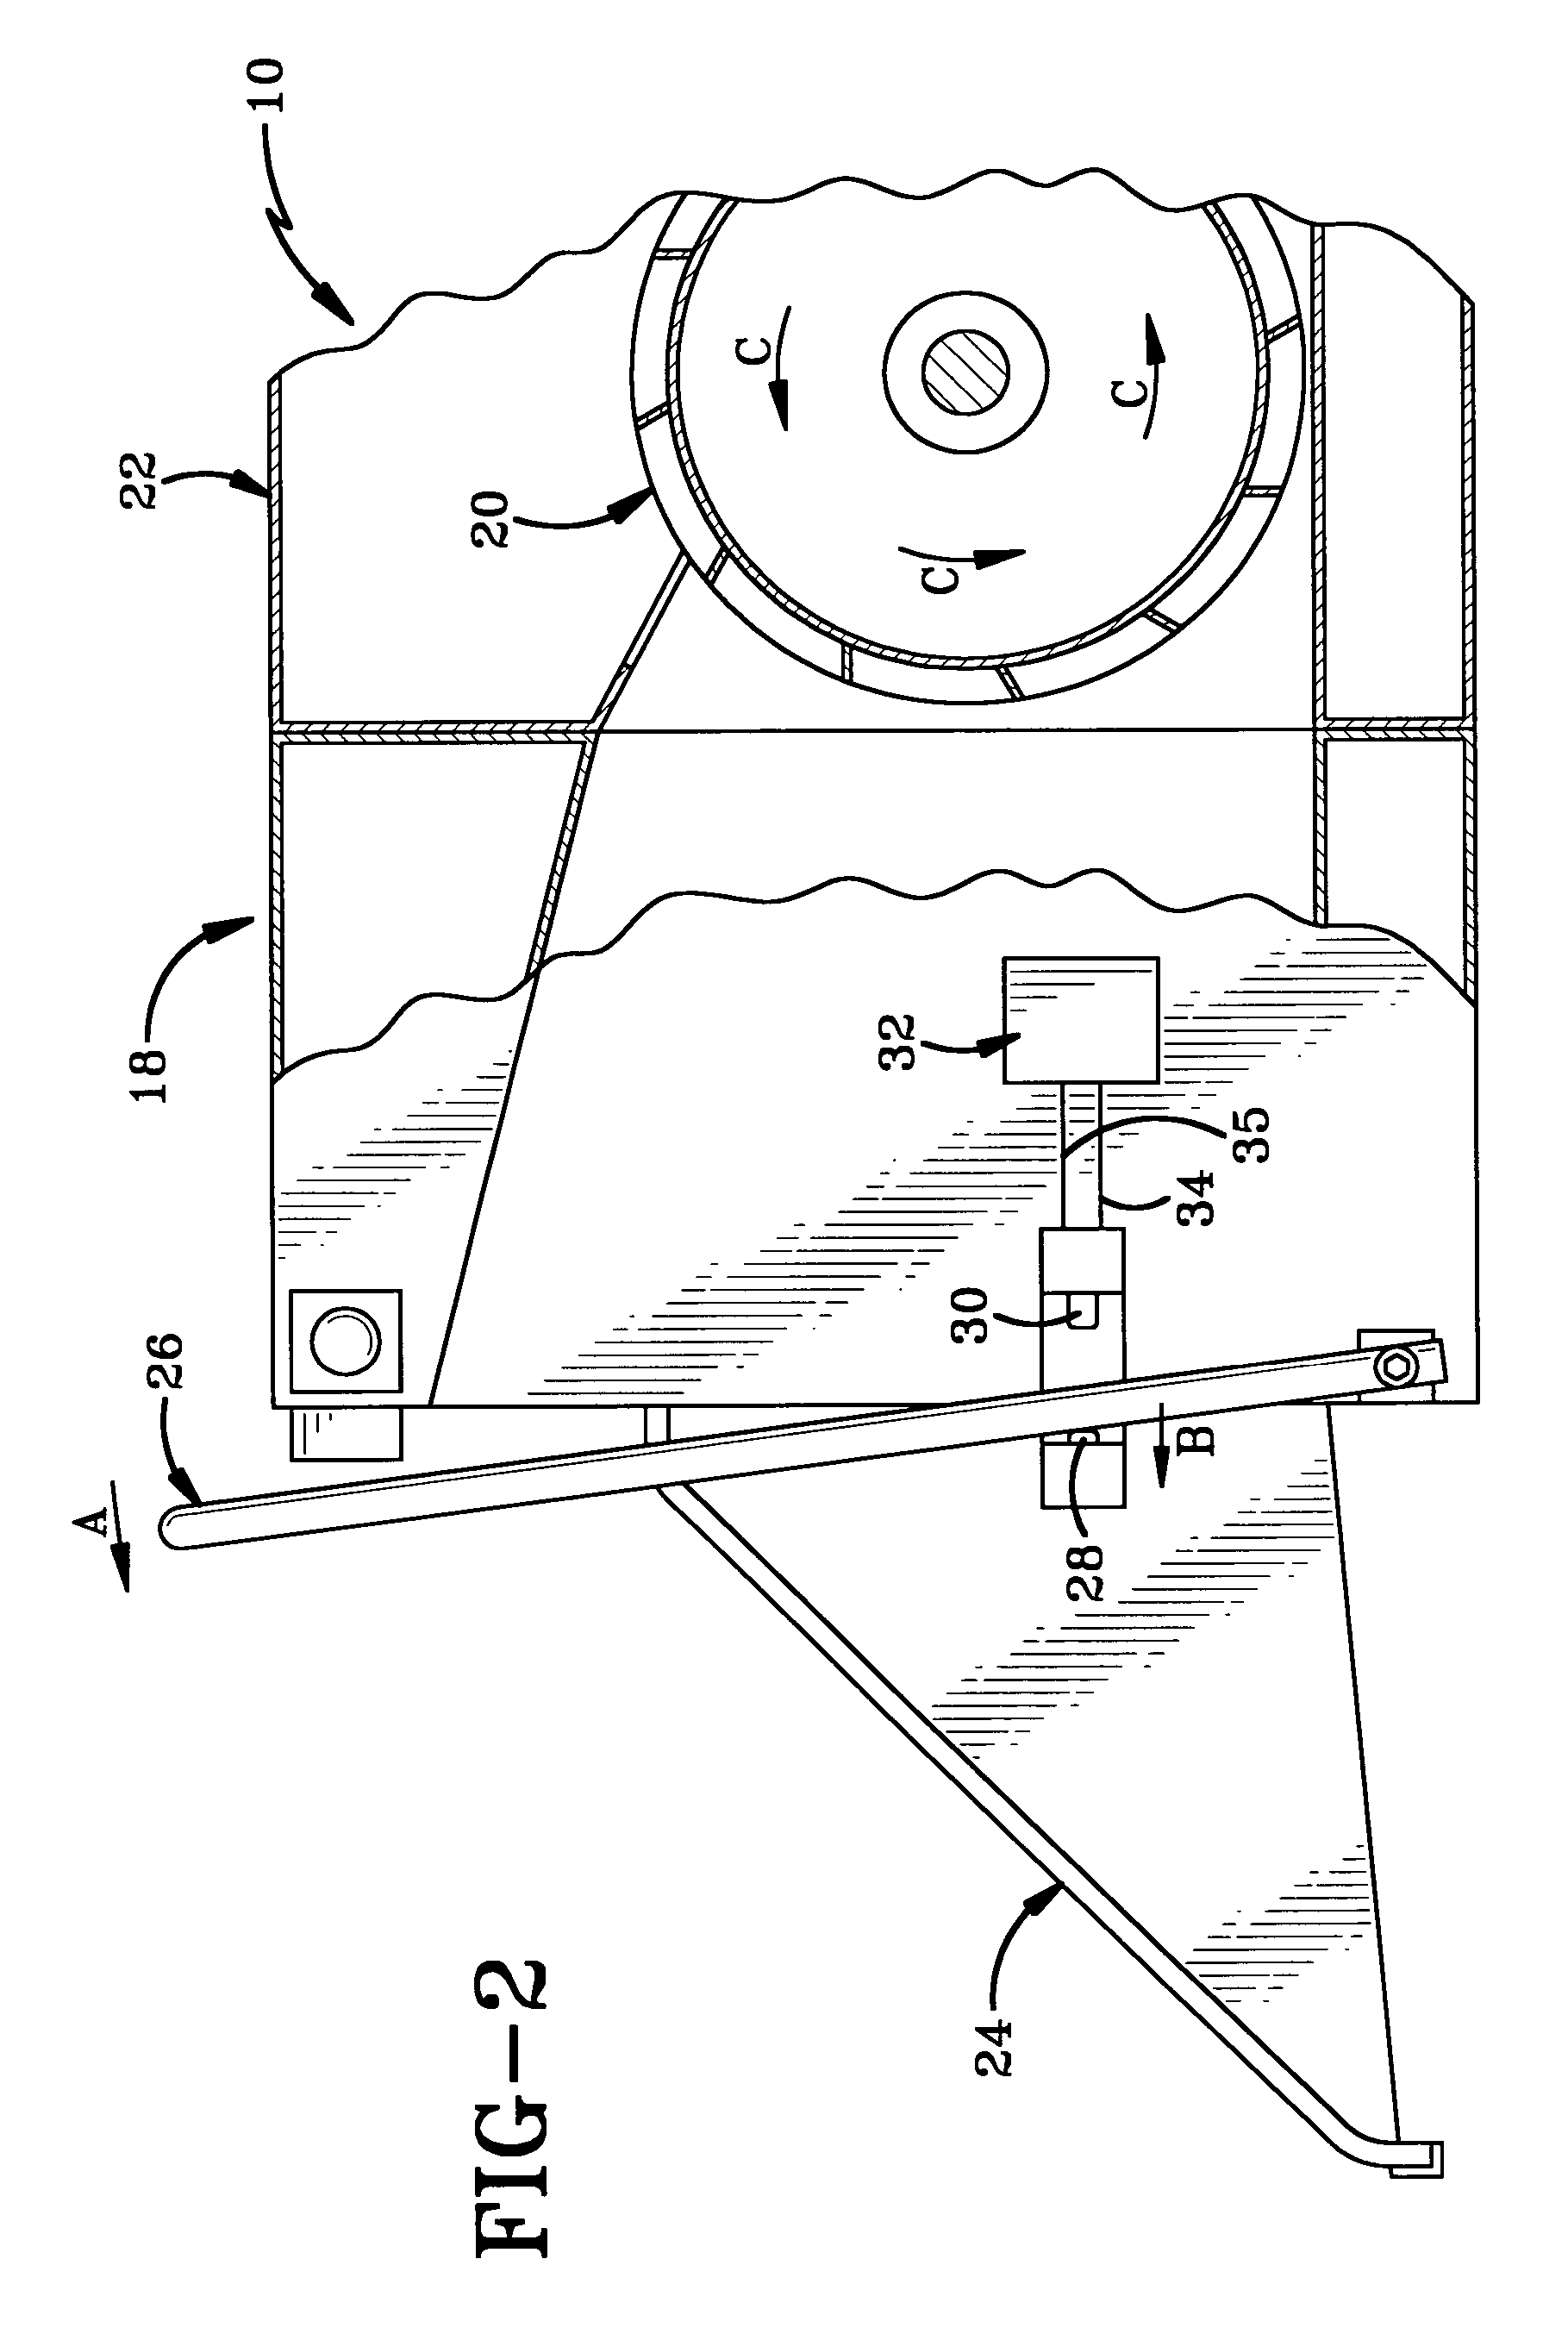 Method of operating a wood chipper and power transmission system for use therewith